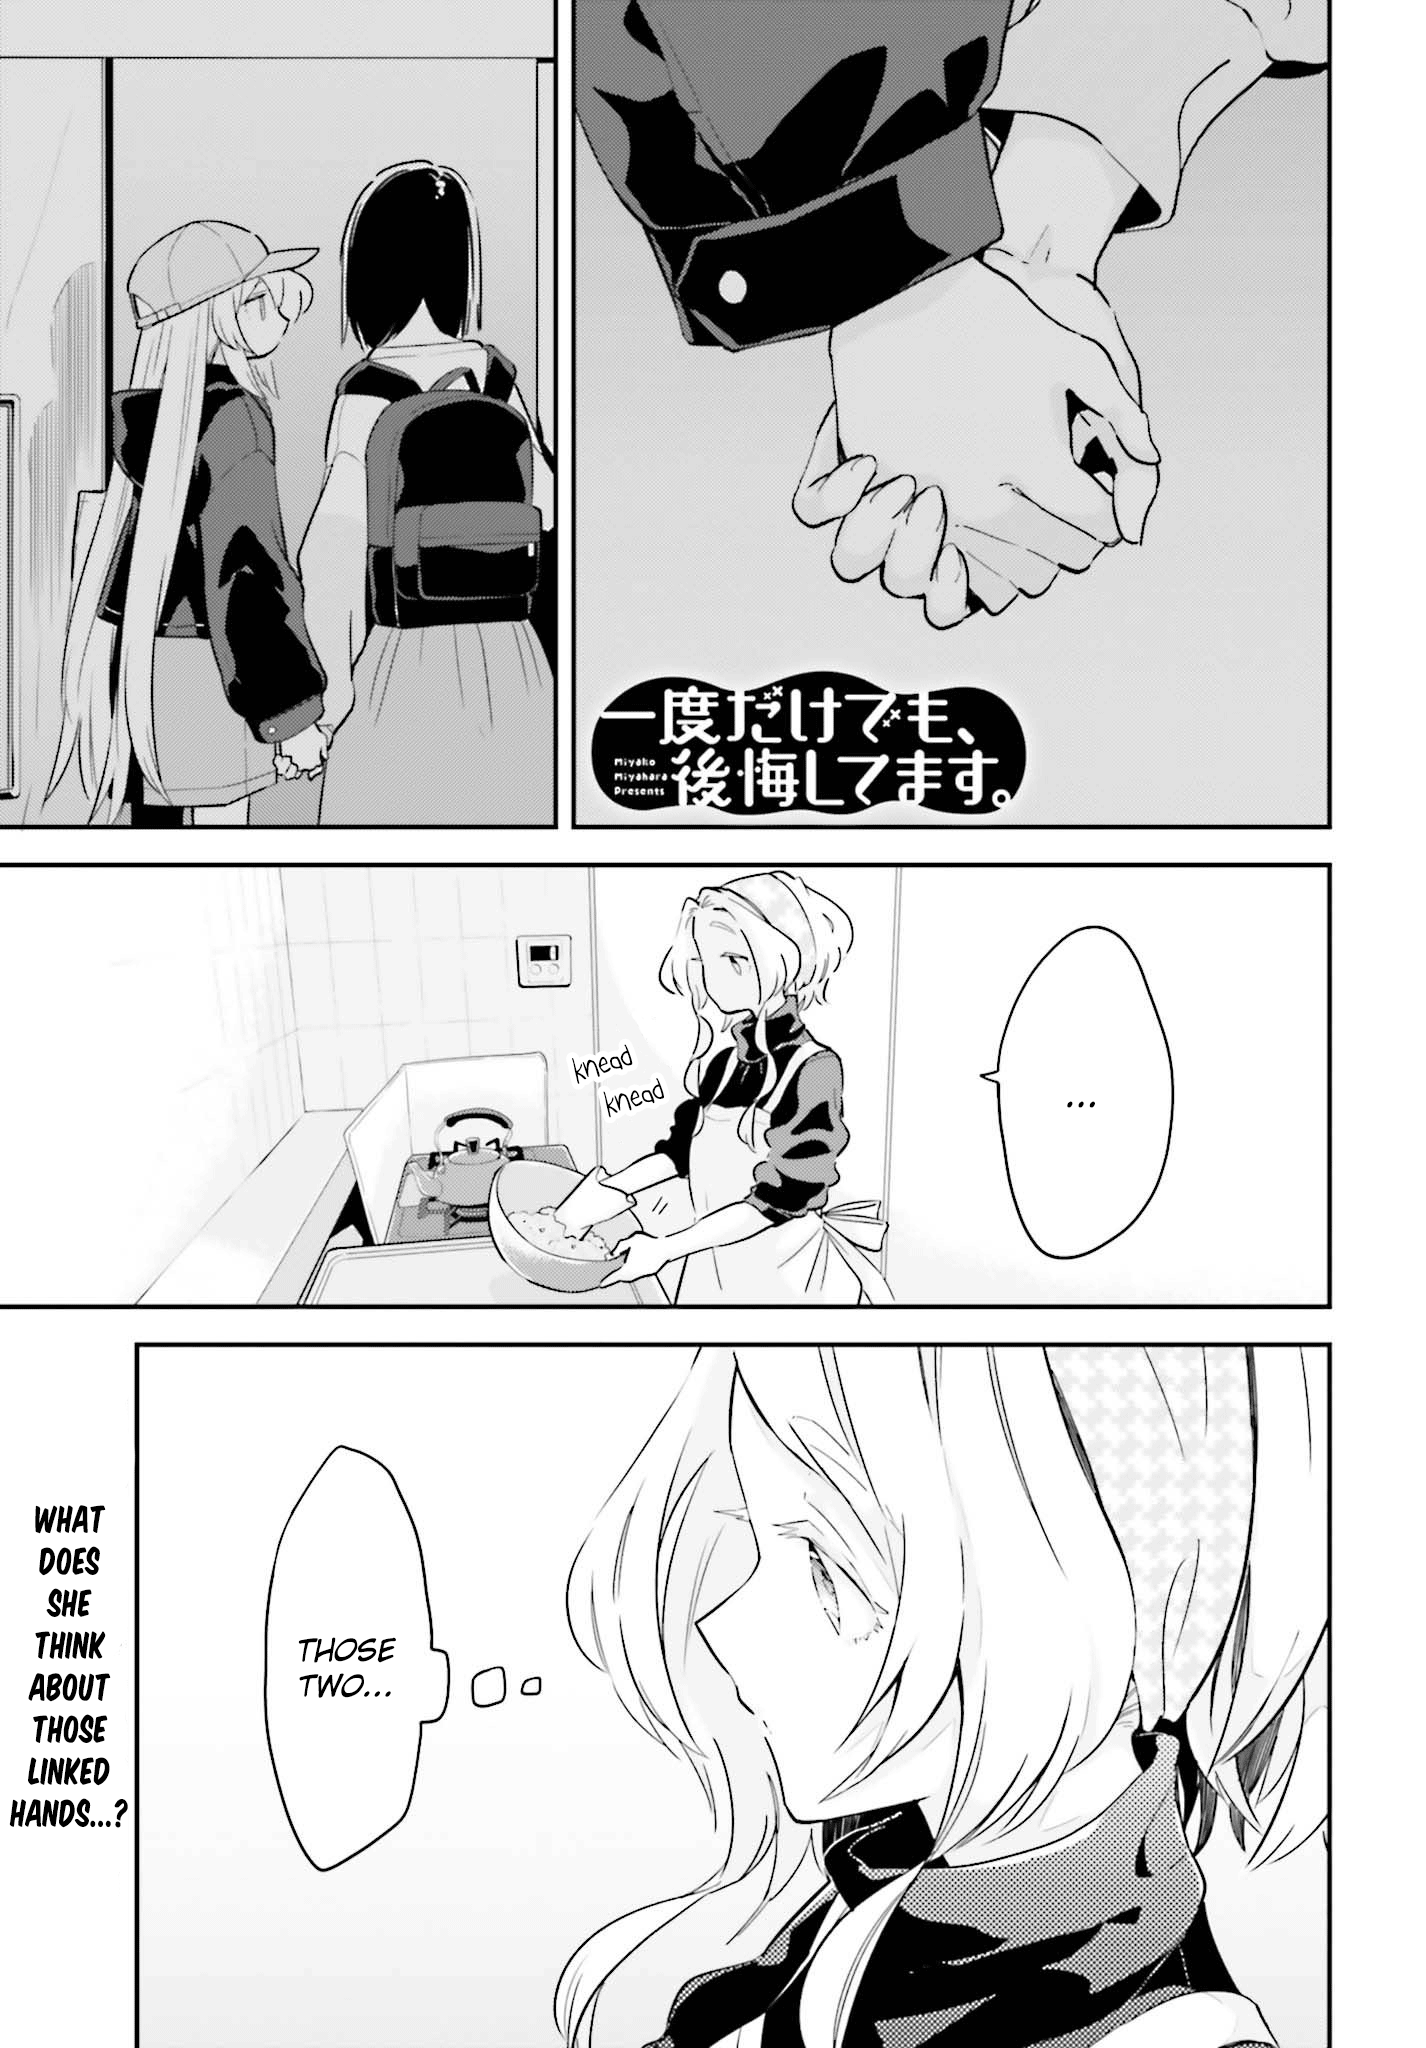 Even If It Was Just Once, I Regret It - Page 1